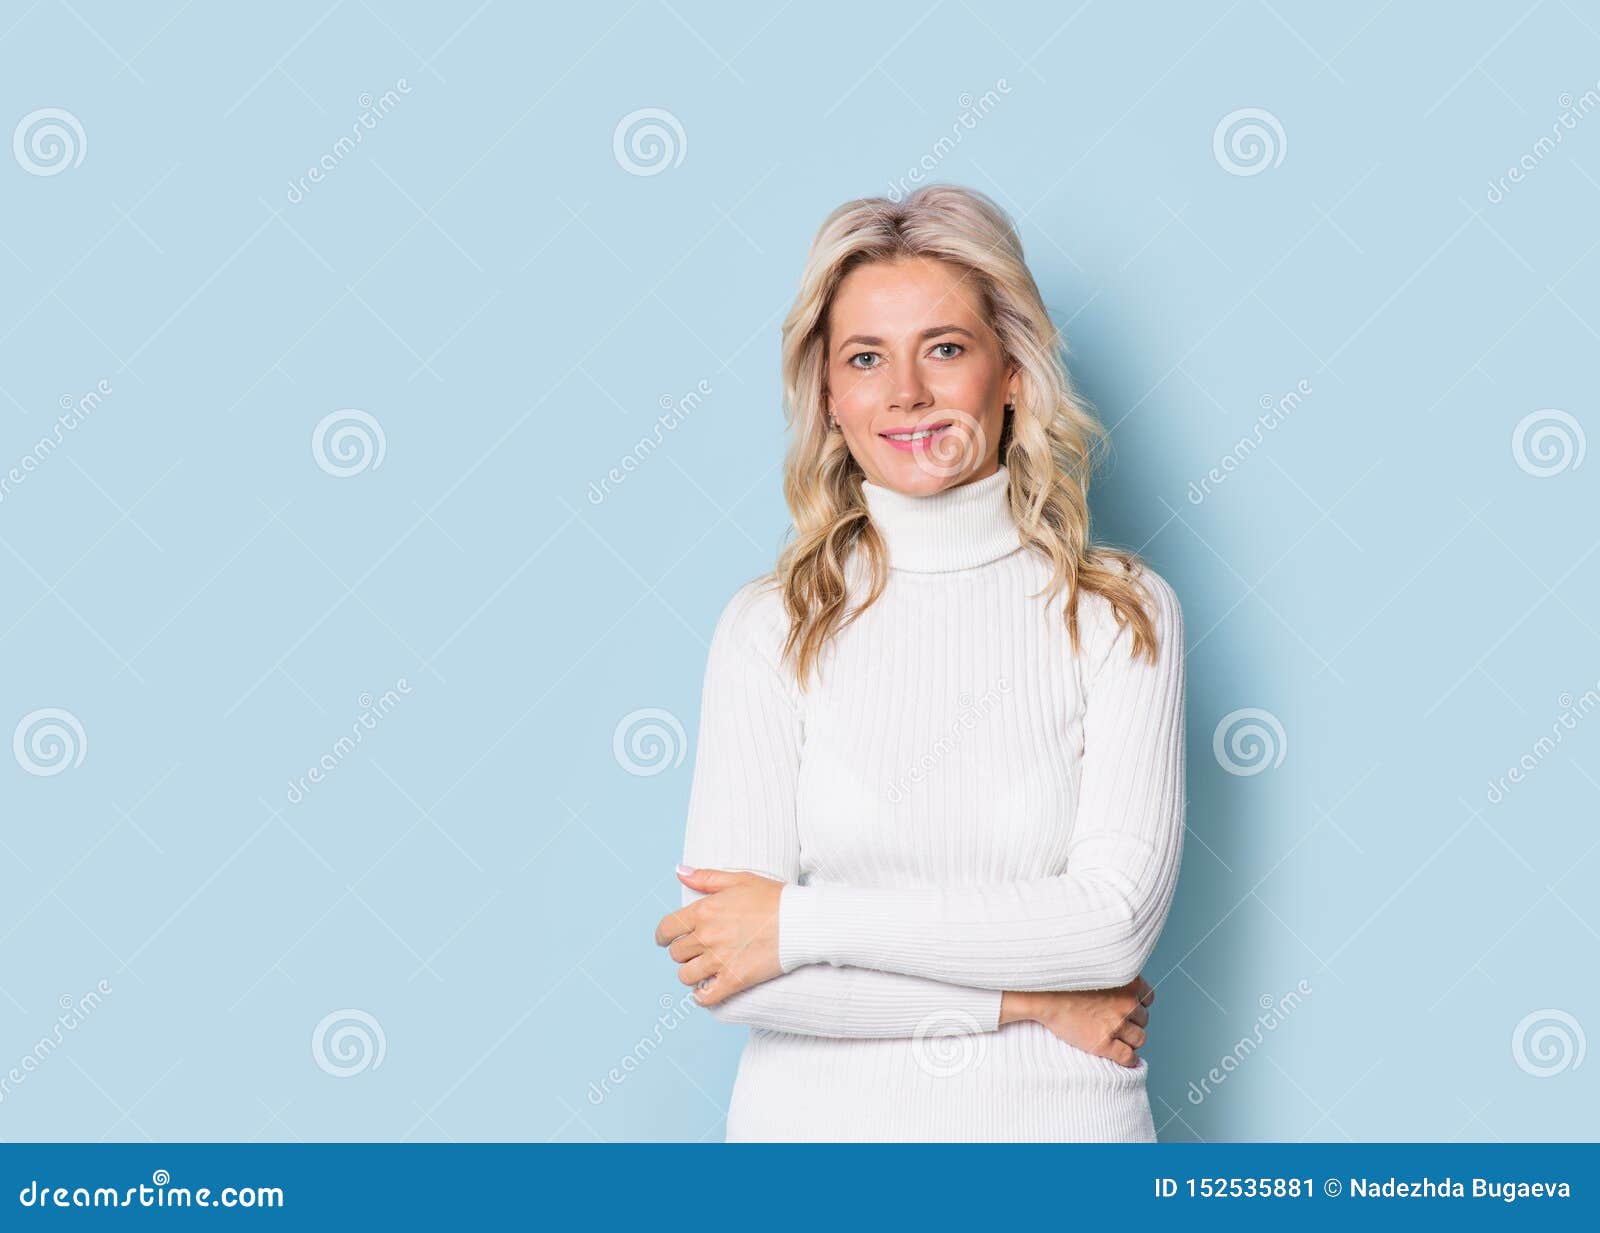 blonde woman adult attractive beautiful smiling portrait en face, cauasian and scandinavian girl on blue background